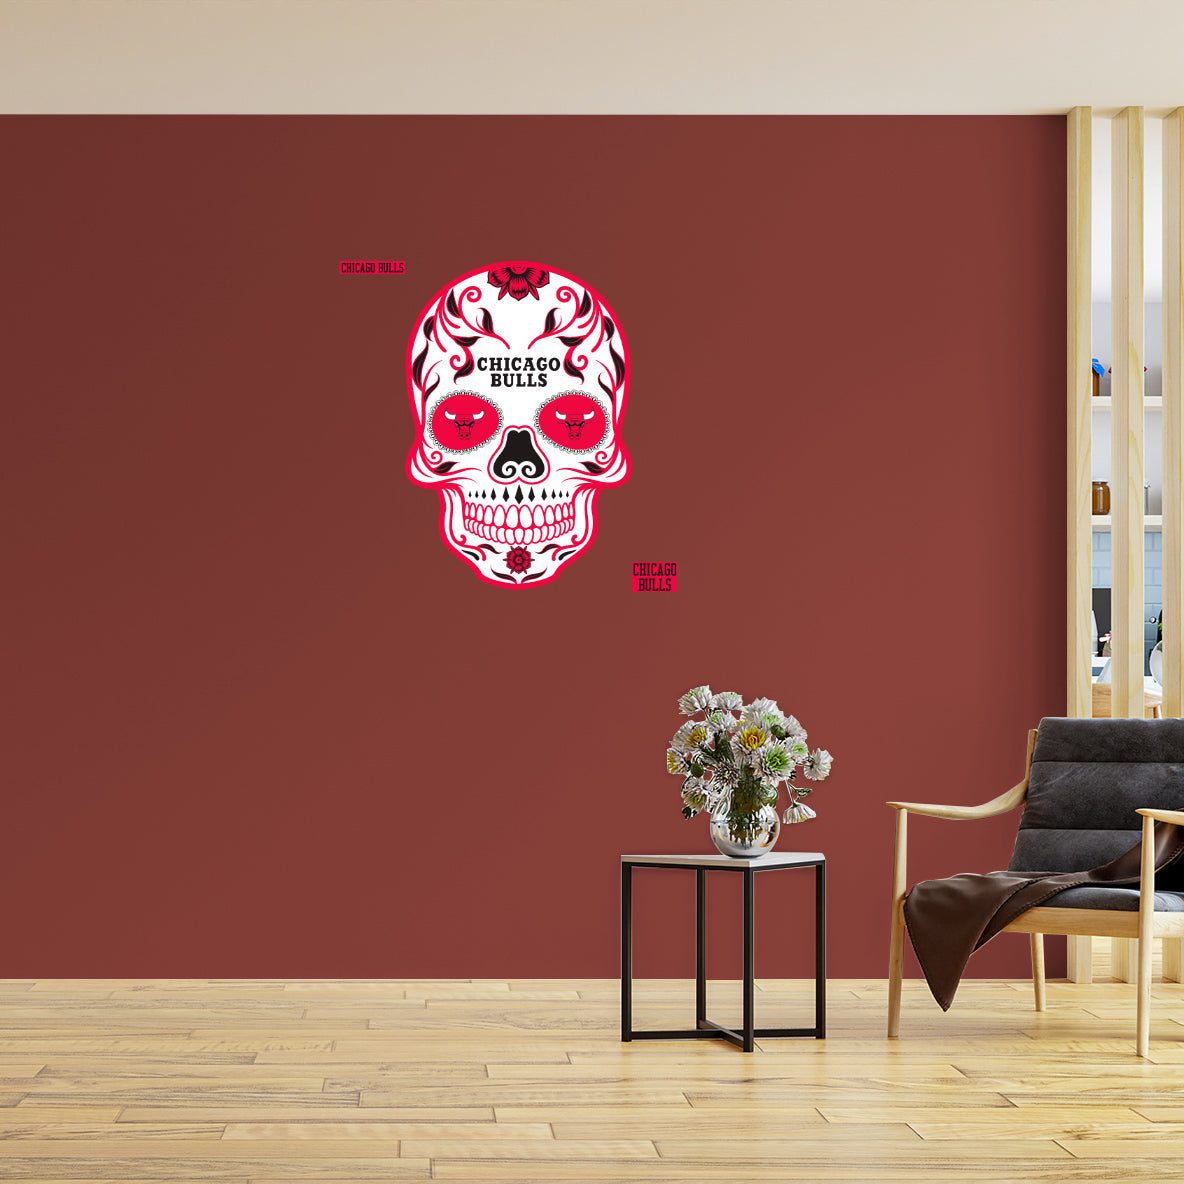 Chicago Bulls: Skull - Officially Licensed NBA Removable Adhesive Decal